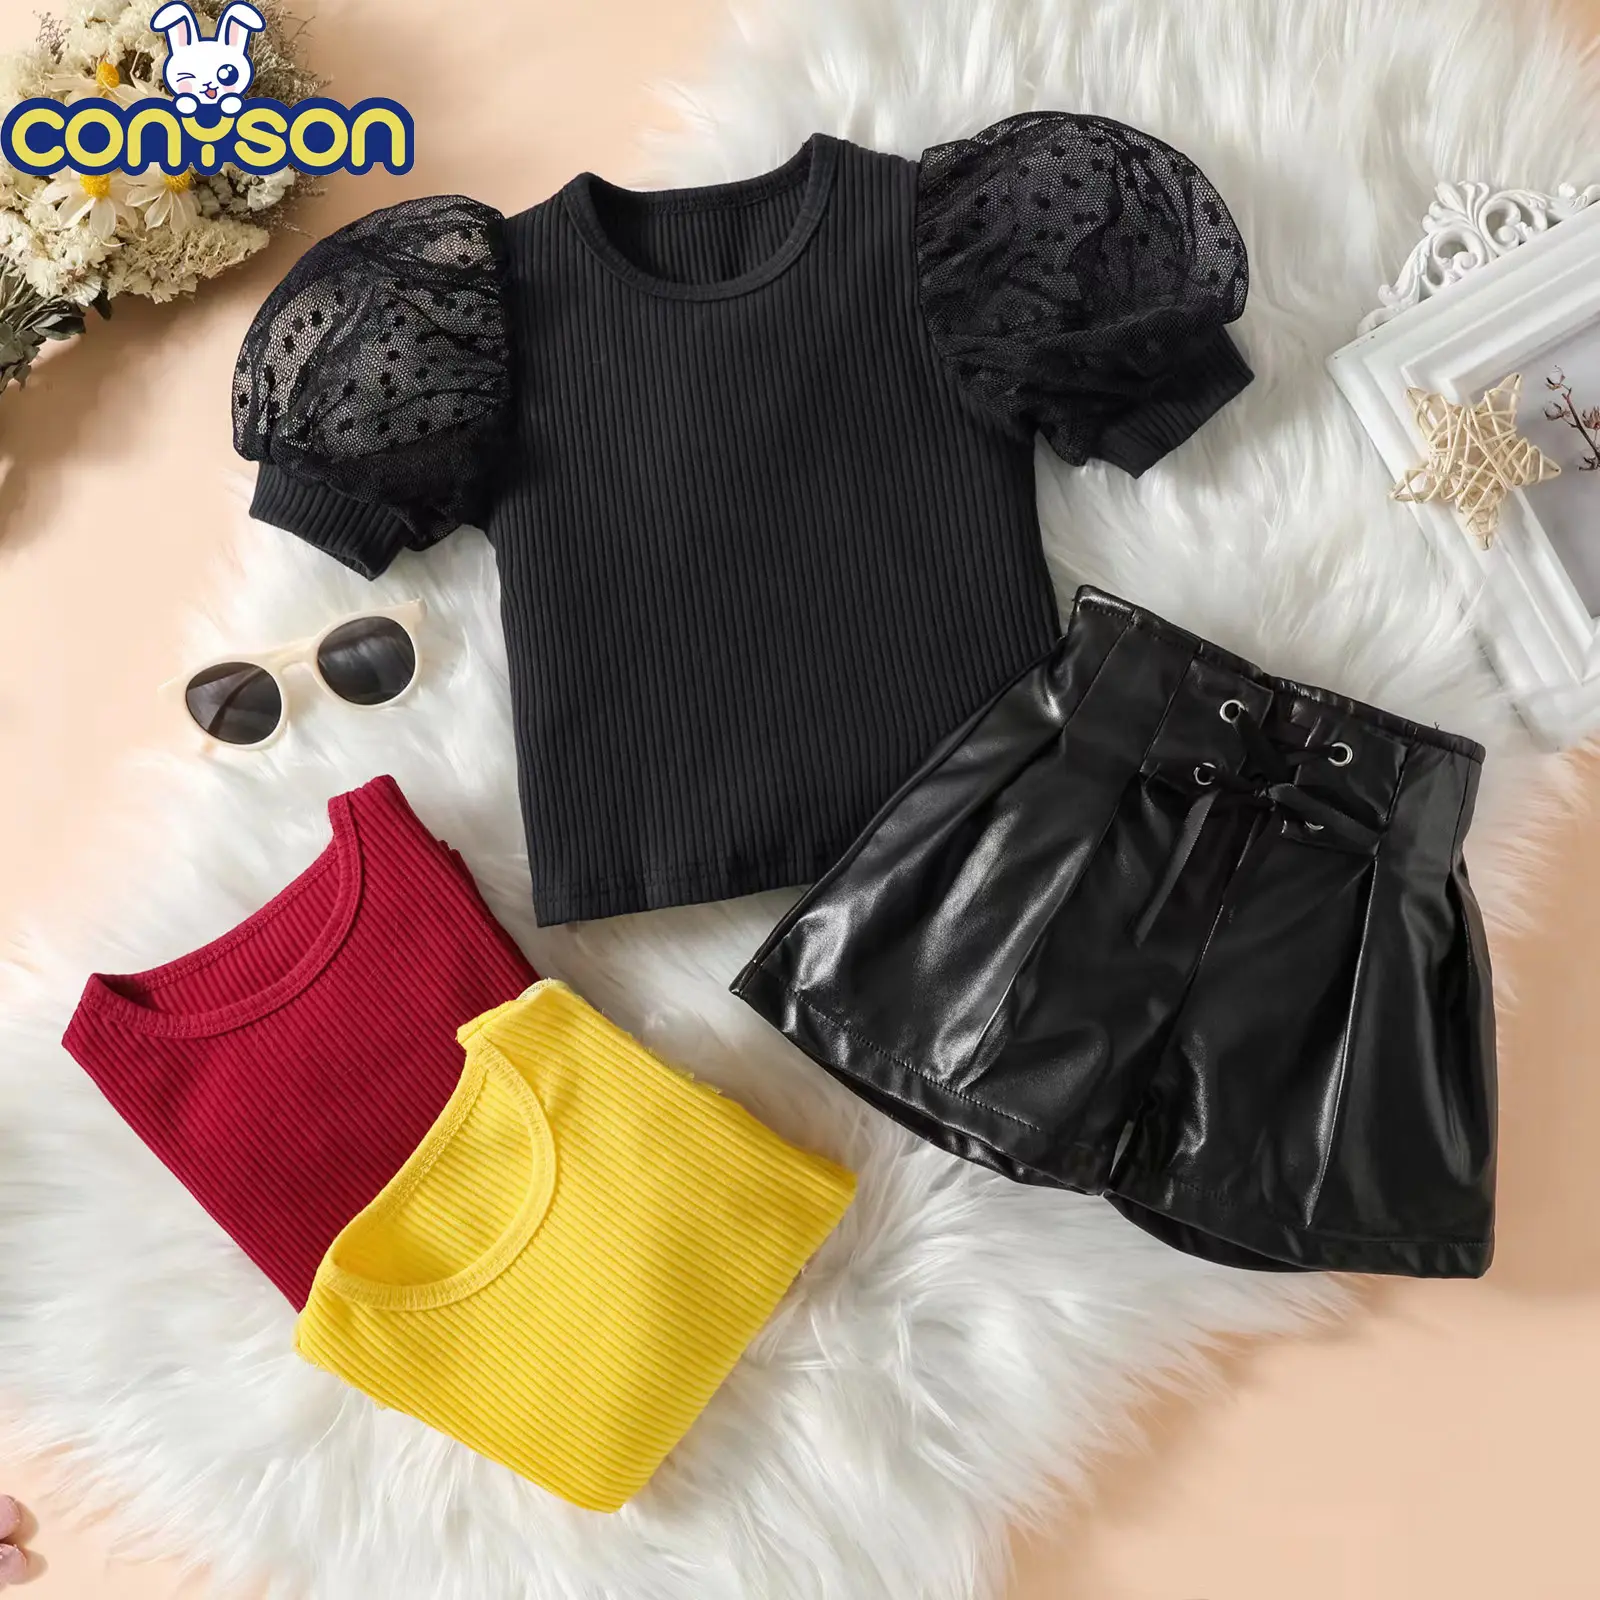 Conyson New Arrival Europeon Style Fashionable Splicing Mesh Short Sleeve Design Kids Designer Girls Two Piece Skirt Sets